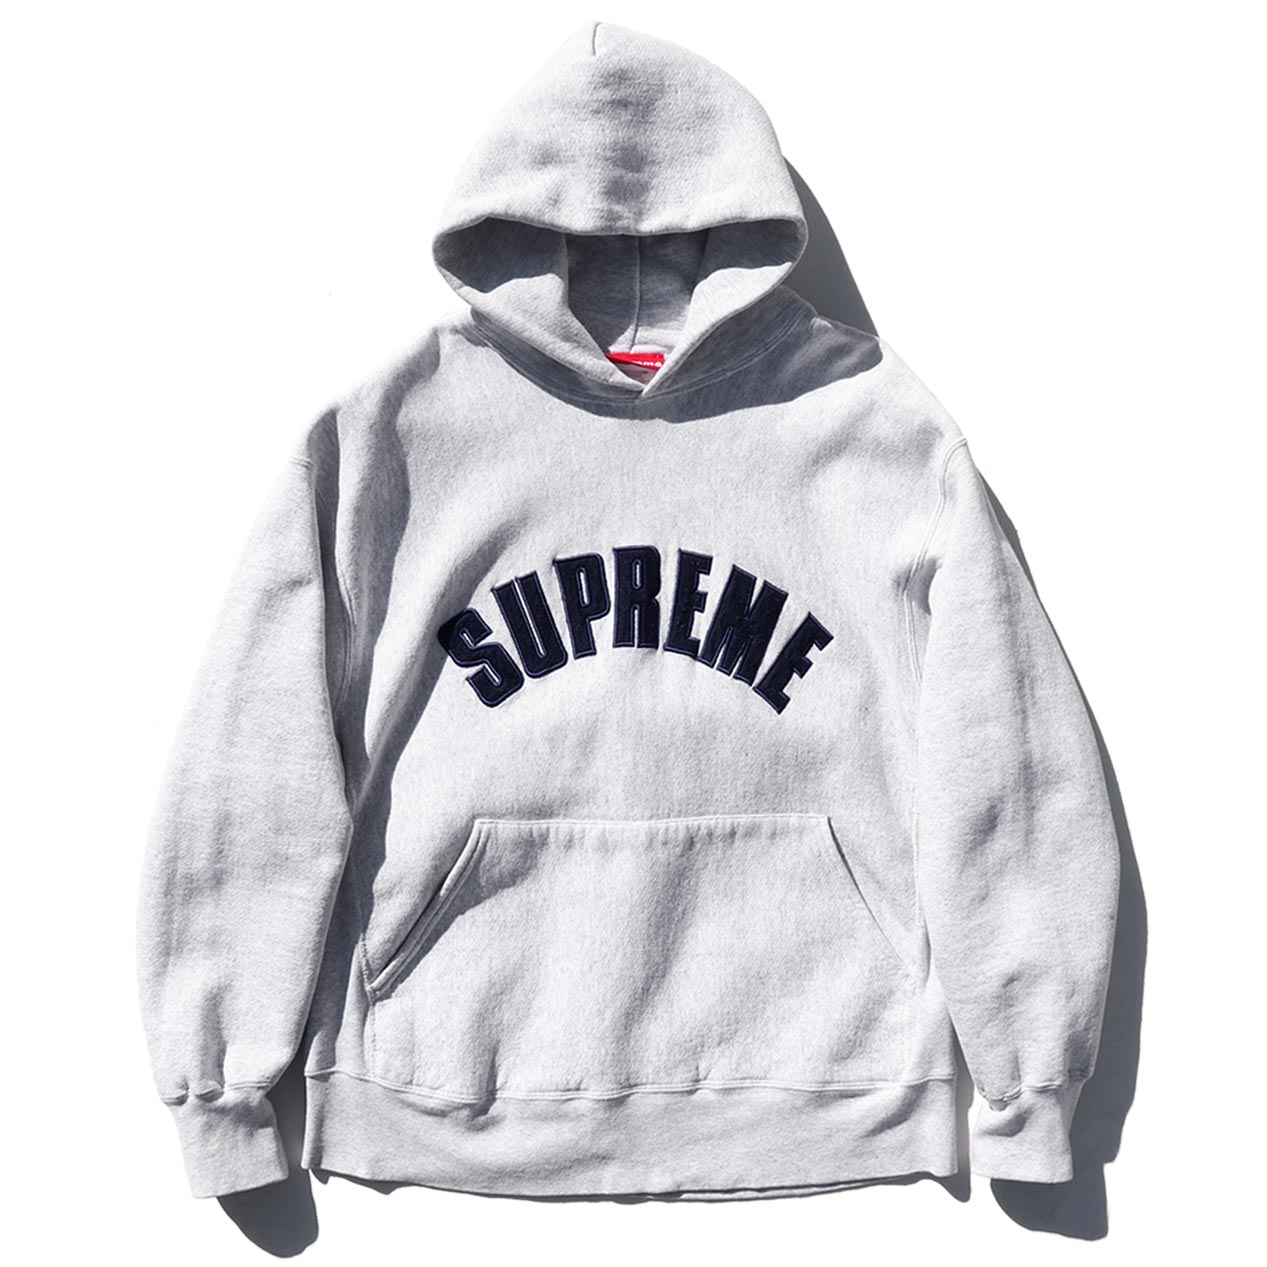 POST JUNK / 90's SUPREME Arc Logo Pullover Hoodie Made In U.S.A. [XL]